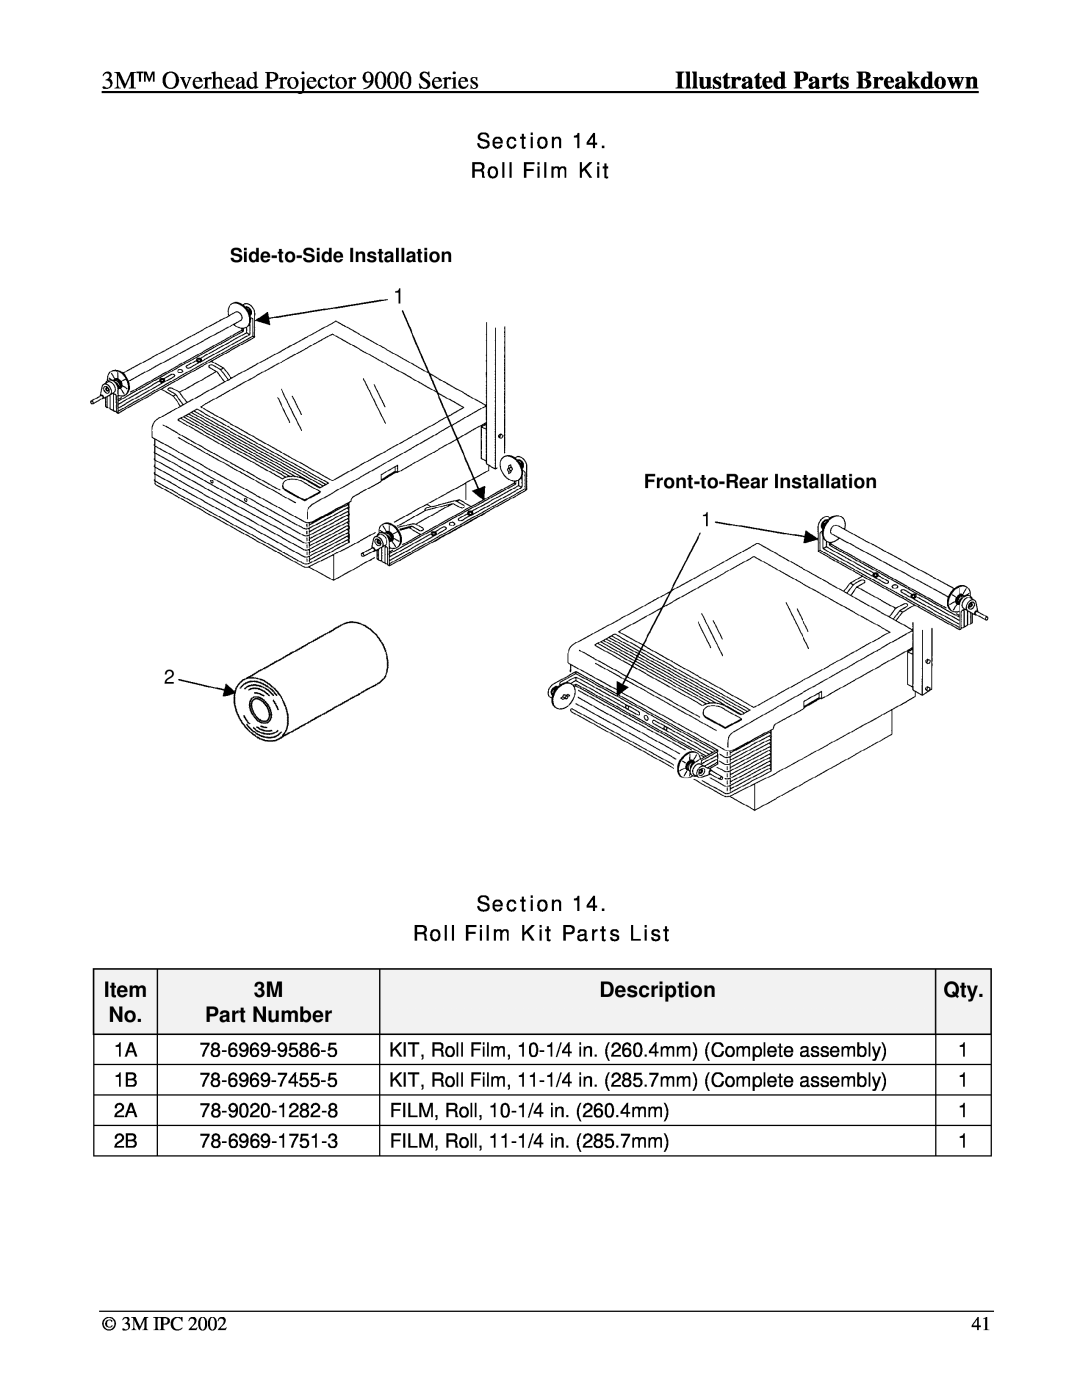 Xerox 9040, 9550, 9075 3M Overhead Projector 9000 Series, Section Roll Film Kit Parts List, Side-to-Side Installation 